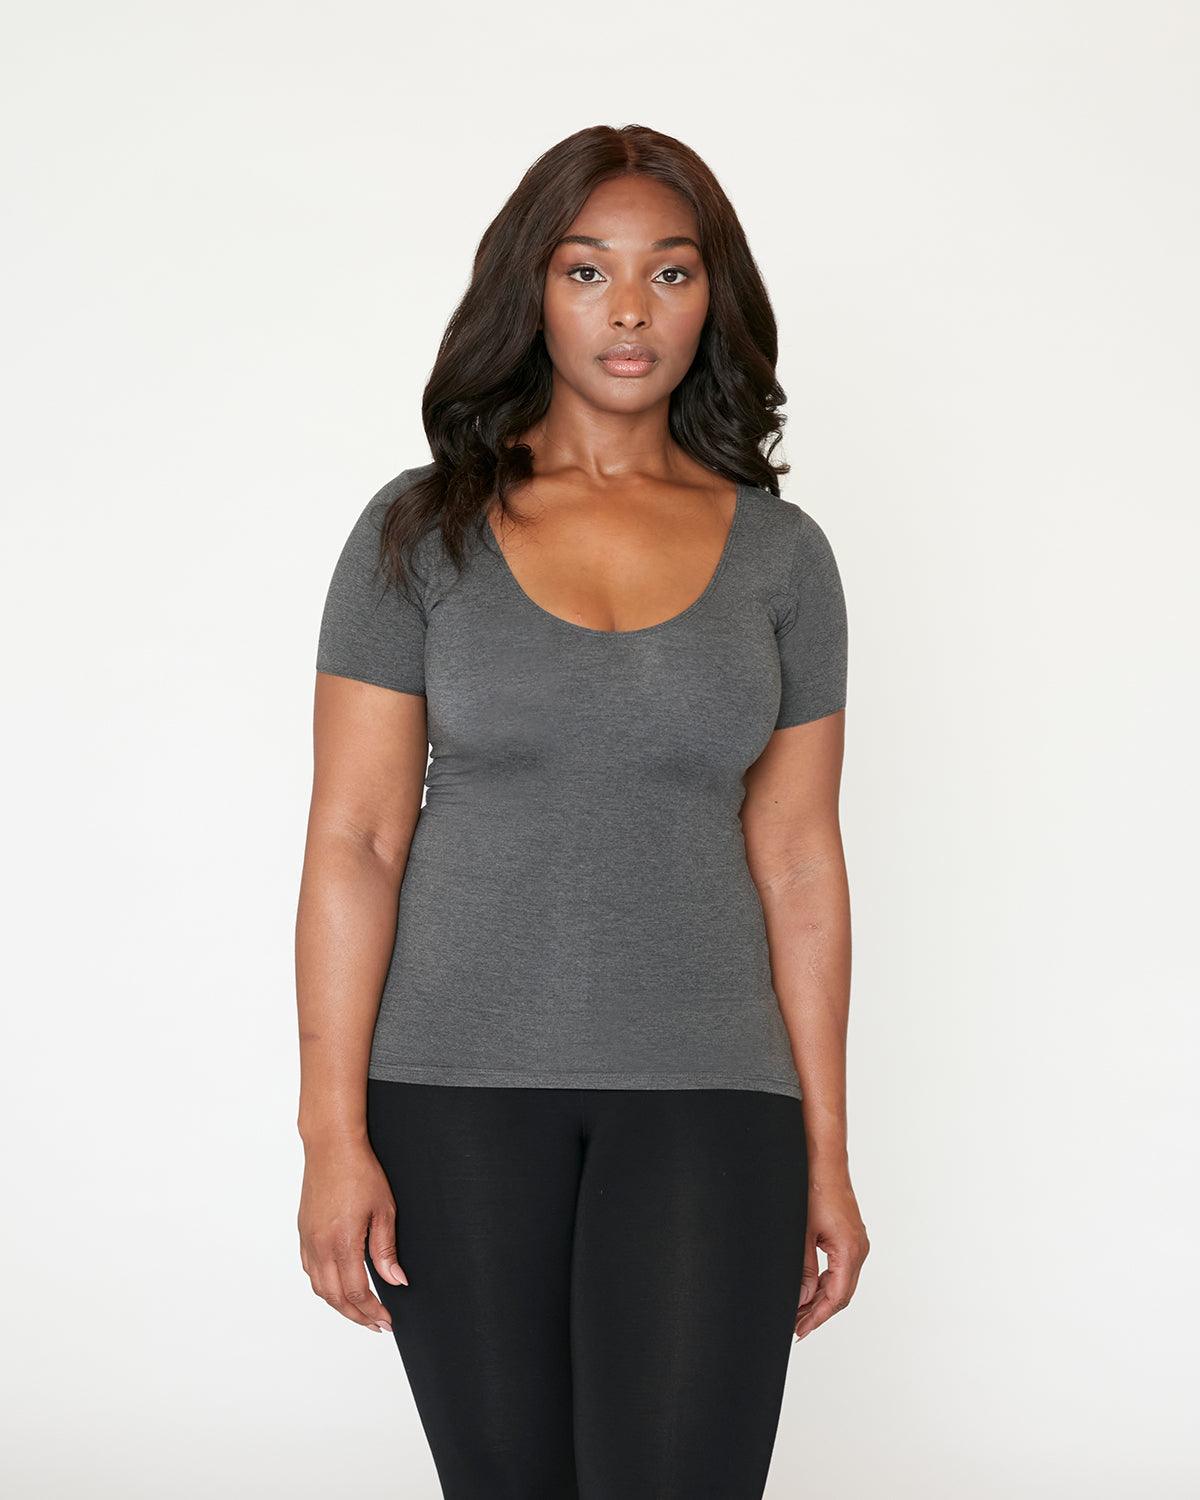 "#color_CHARCOAL| Tolu is 5'7.5", wearing a size M